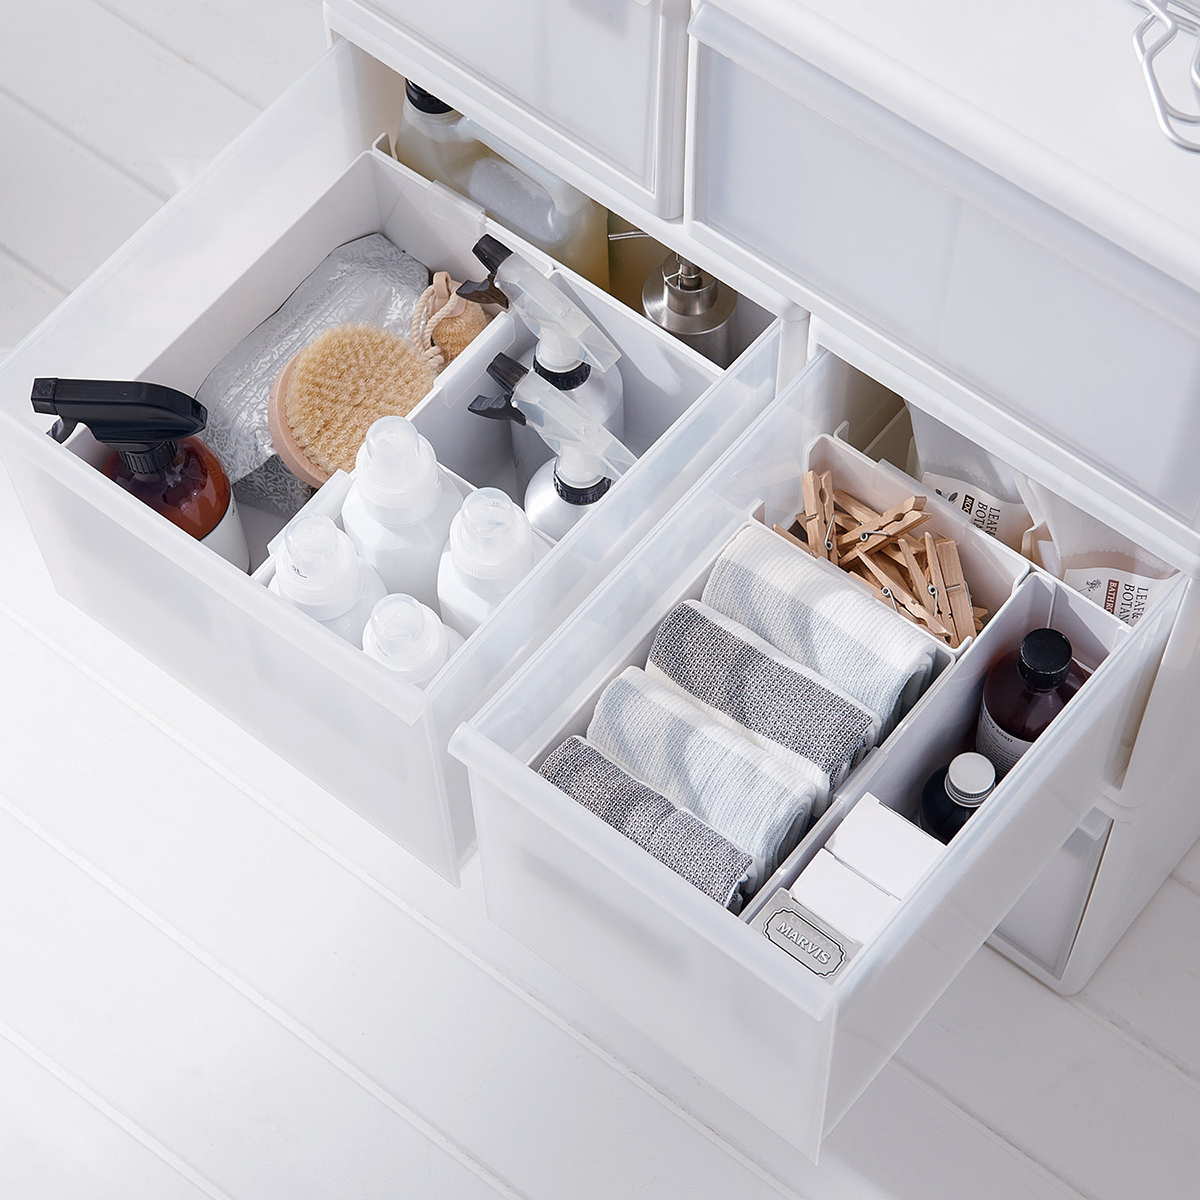 https://images.containerstore.com/catalogimages/342644/10074062g-like-it-drawer-organizer-w.jpg